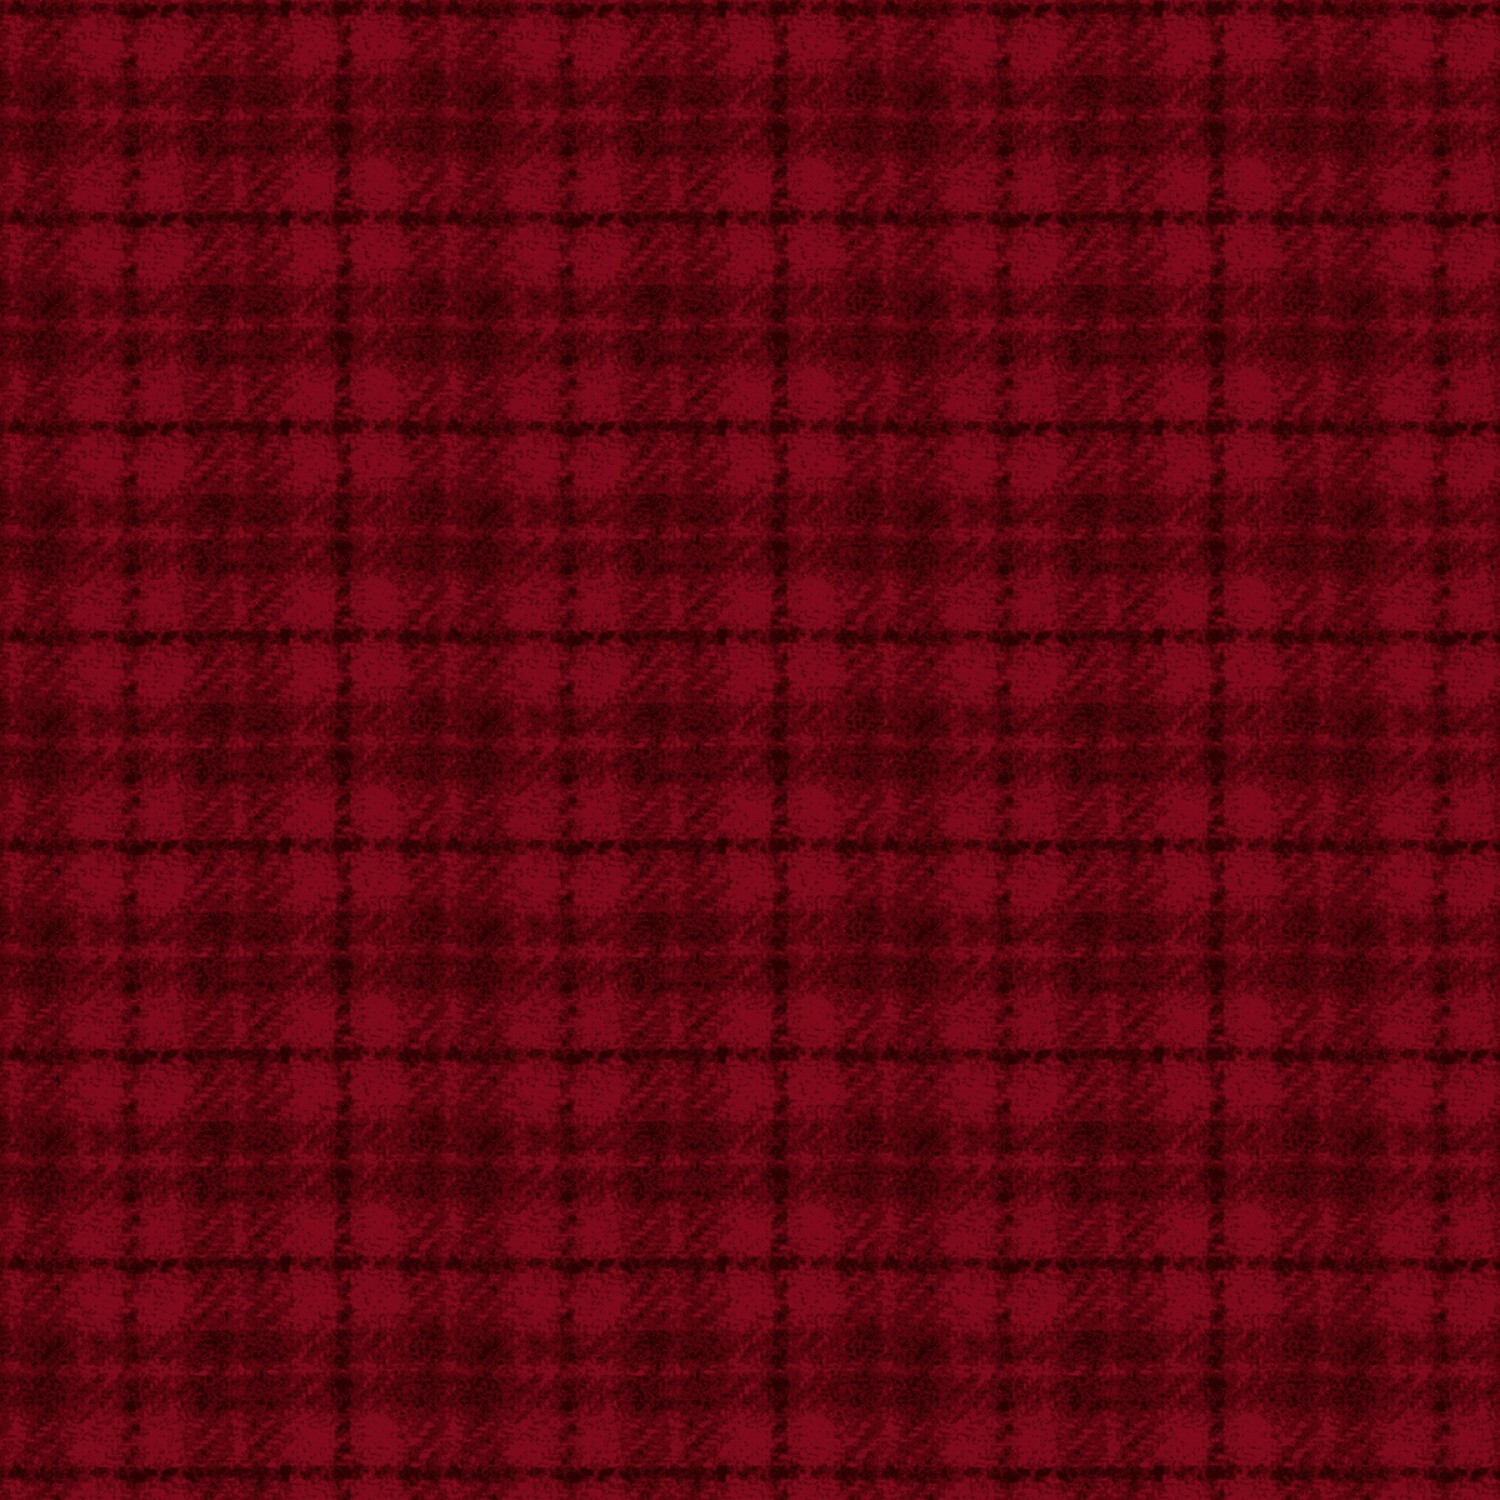 Woolies Flannel - Red Plaid - 1/2m cut 58220